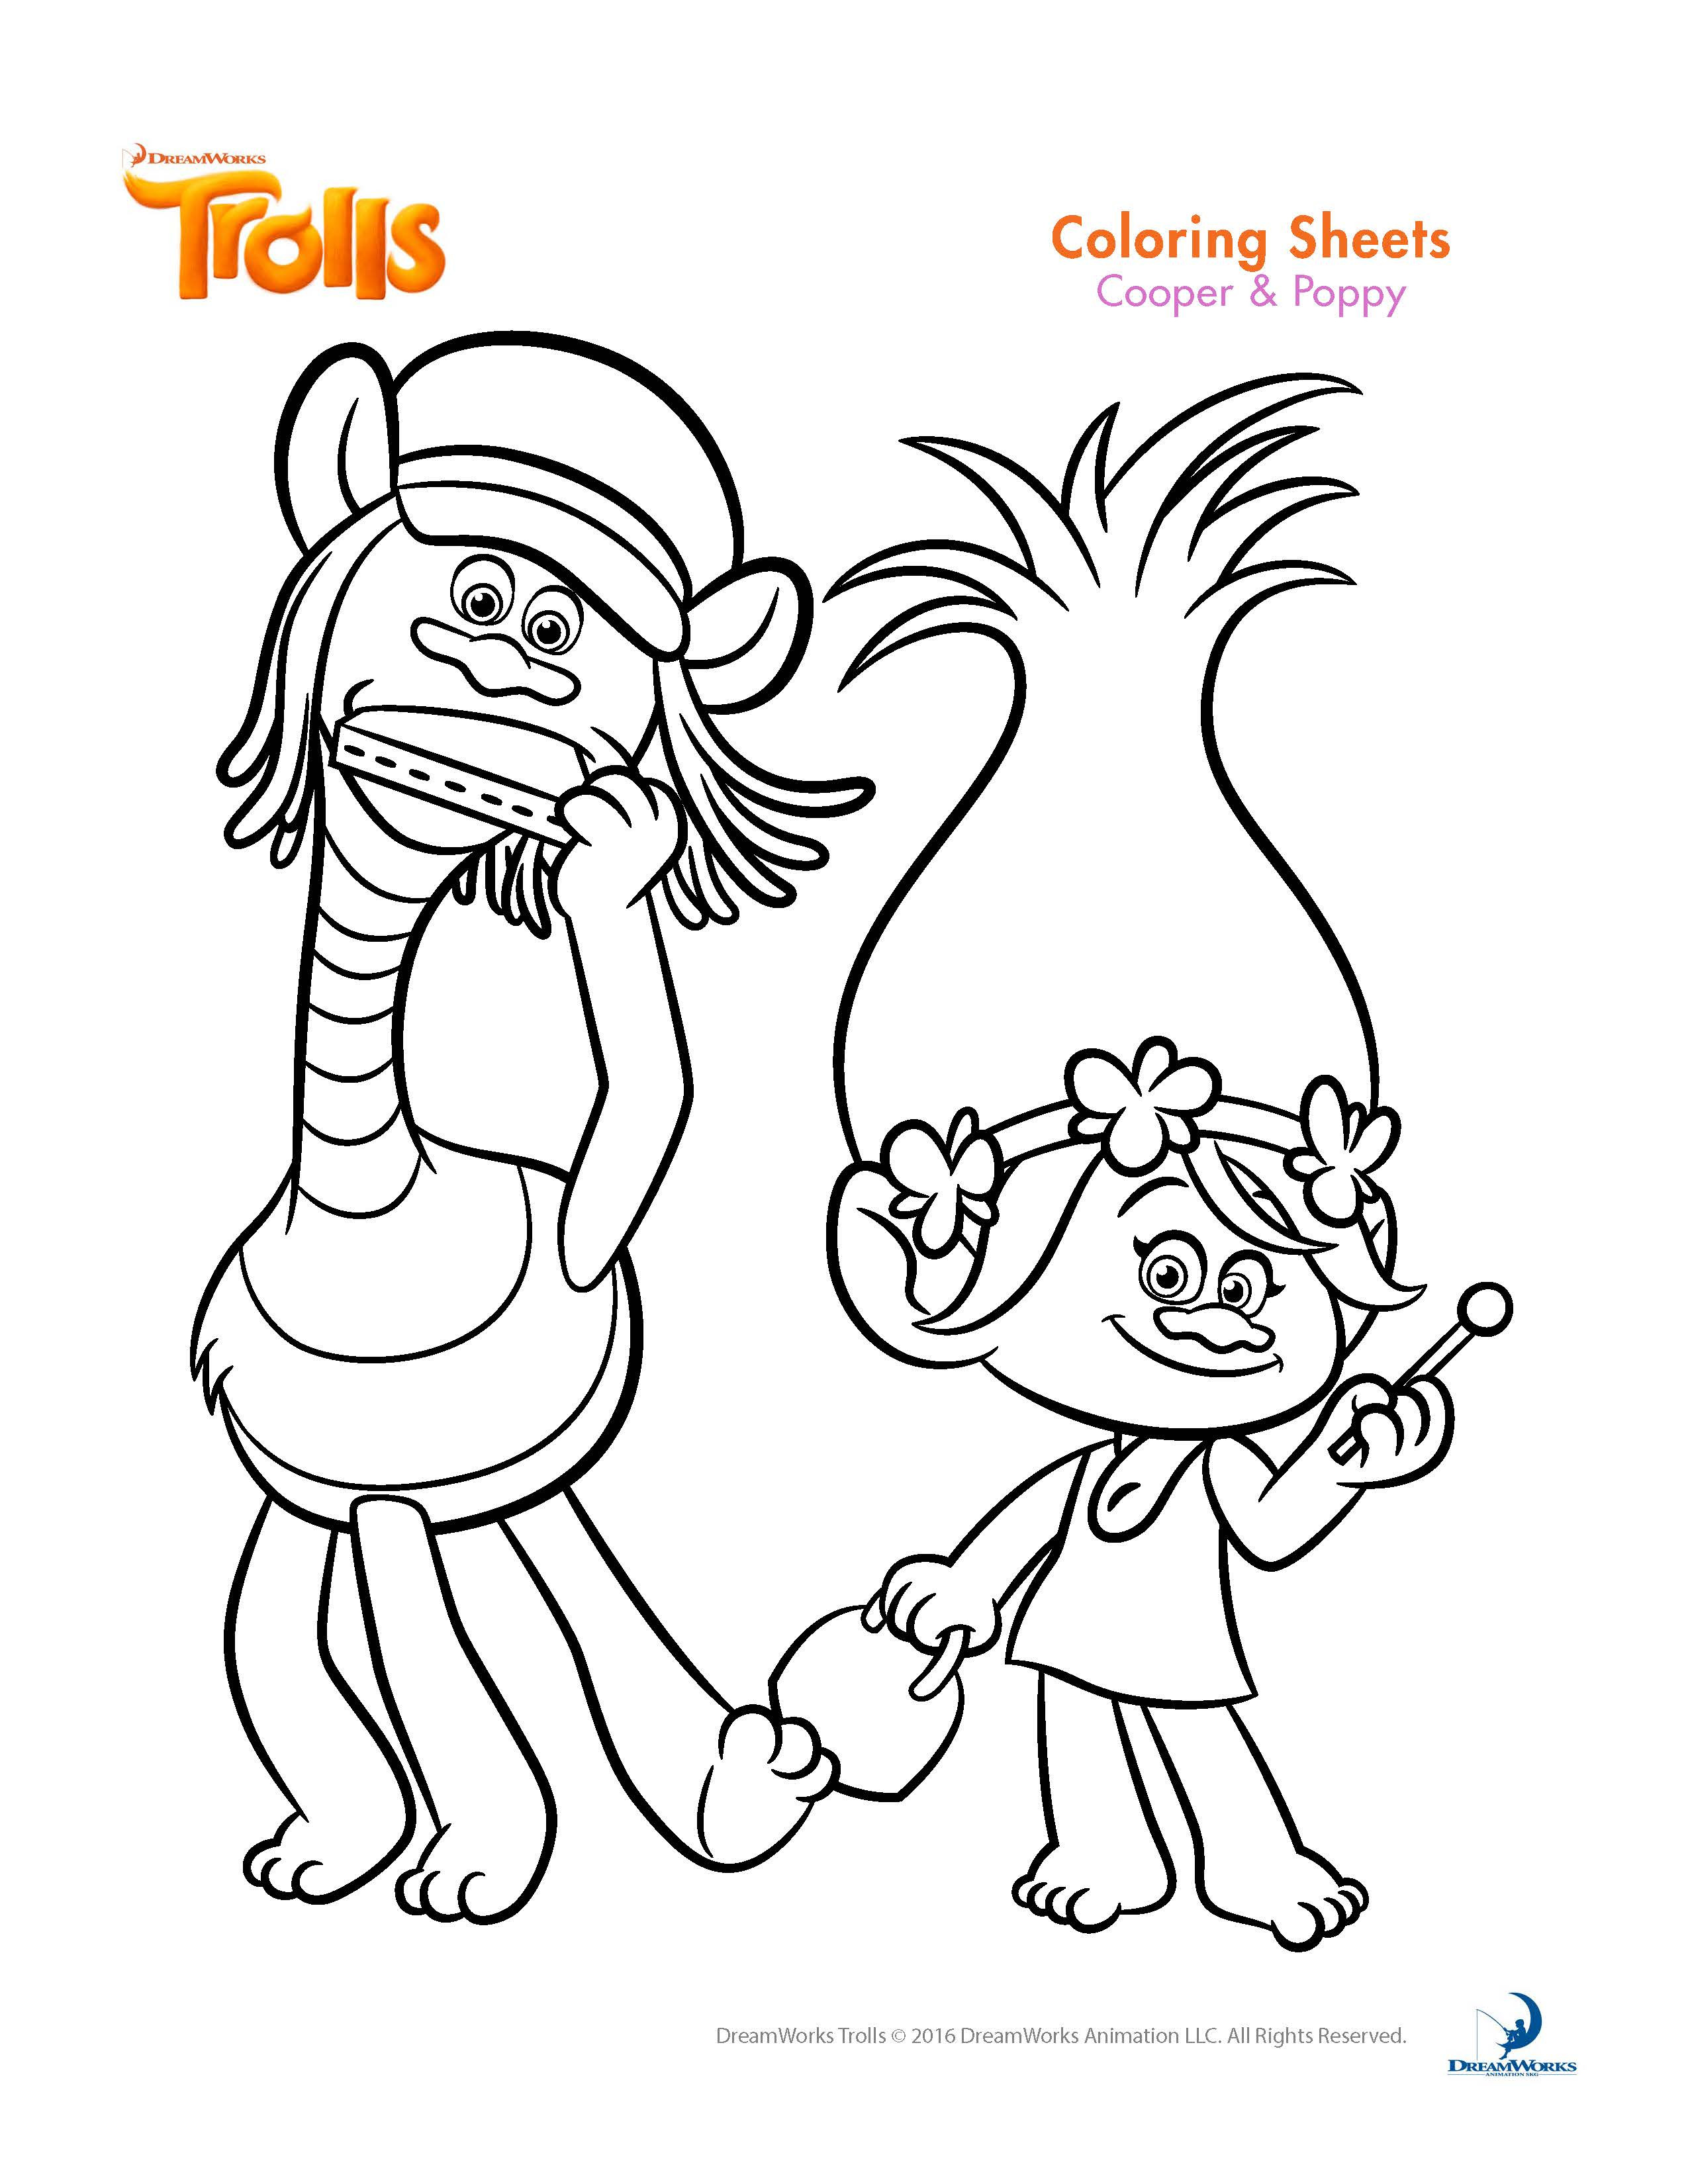 Trolls Adult Coloring Book
 Trolls Movie Coloring Pages Best Coloring Pages For Kids